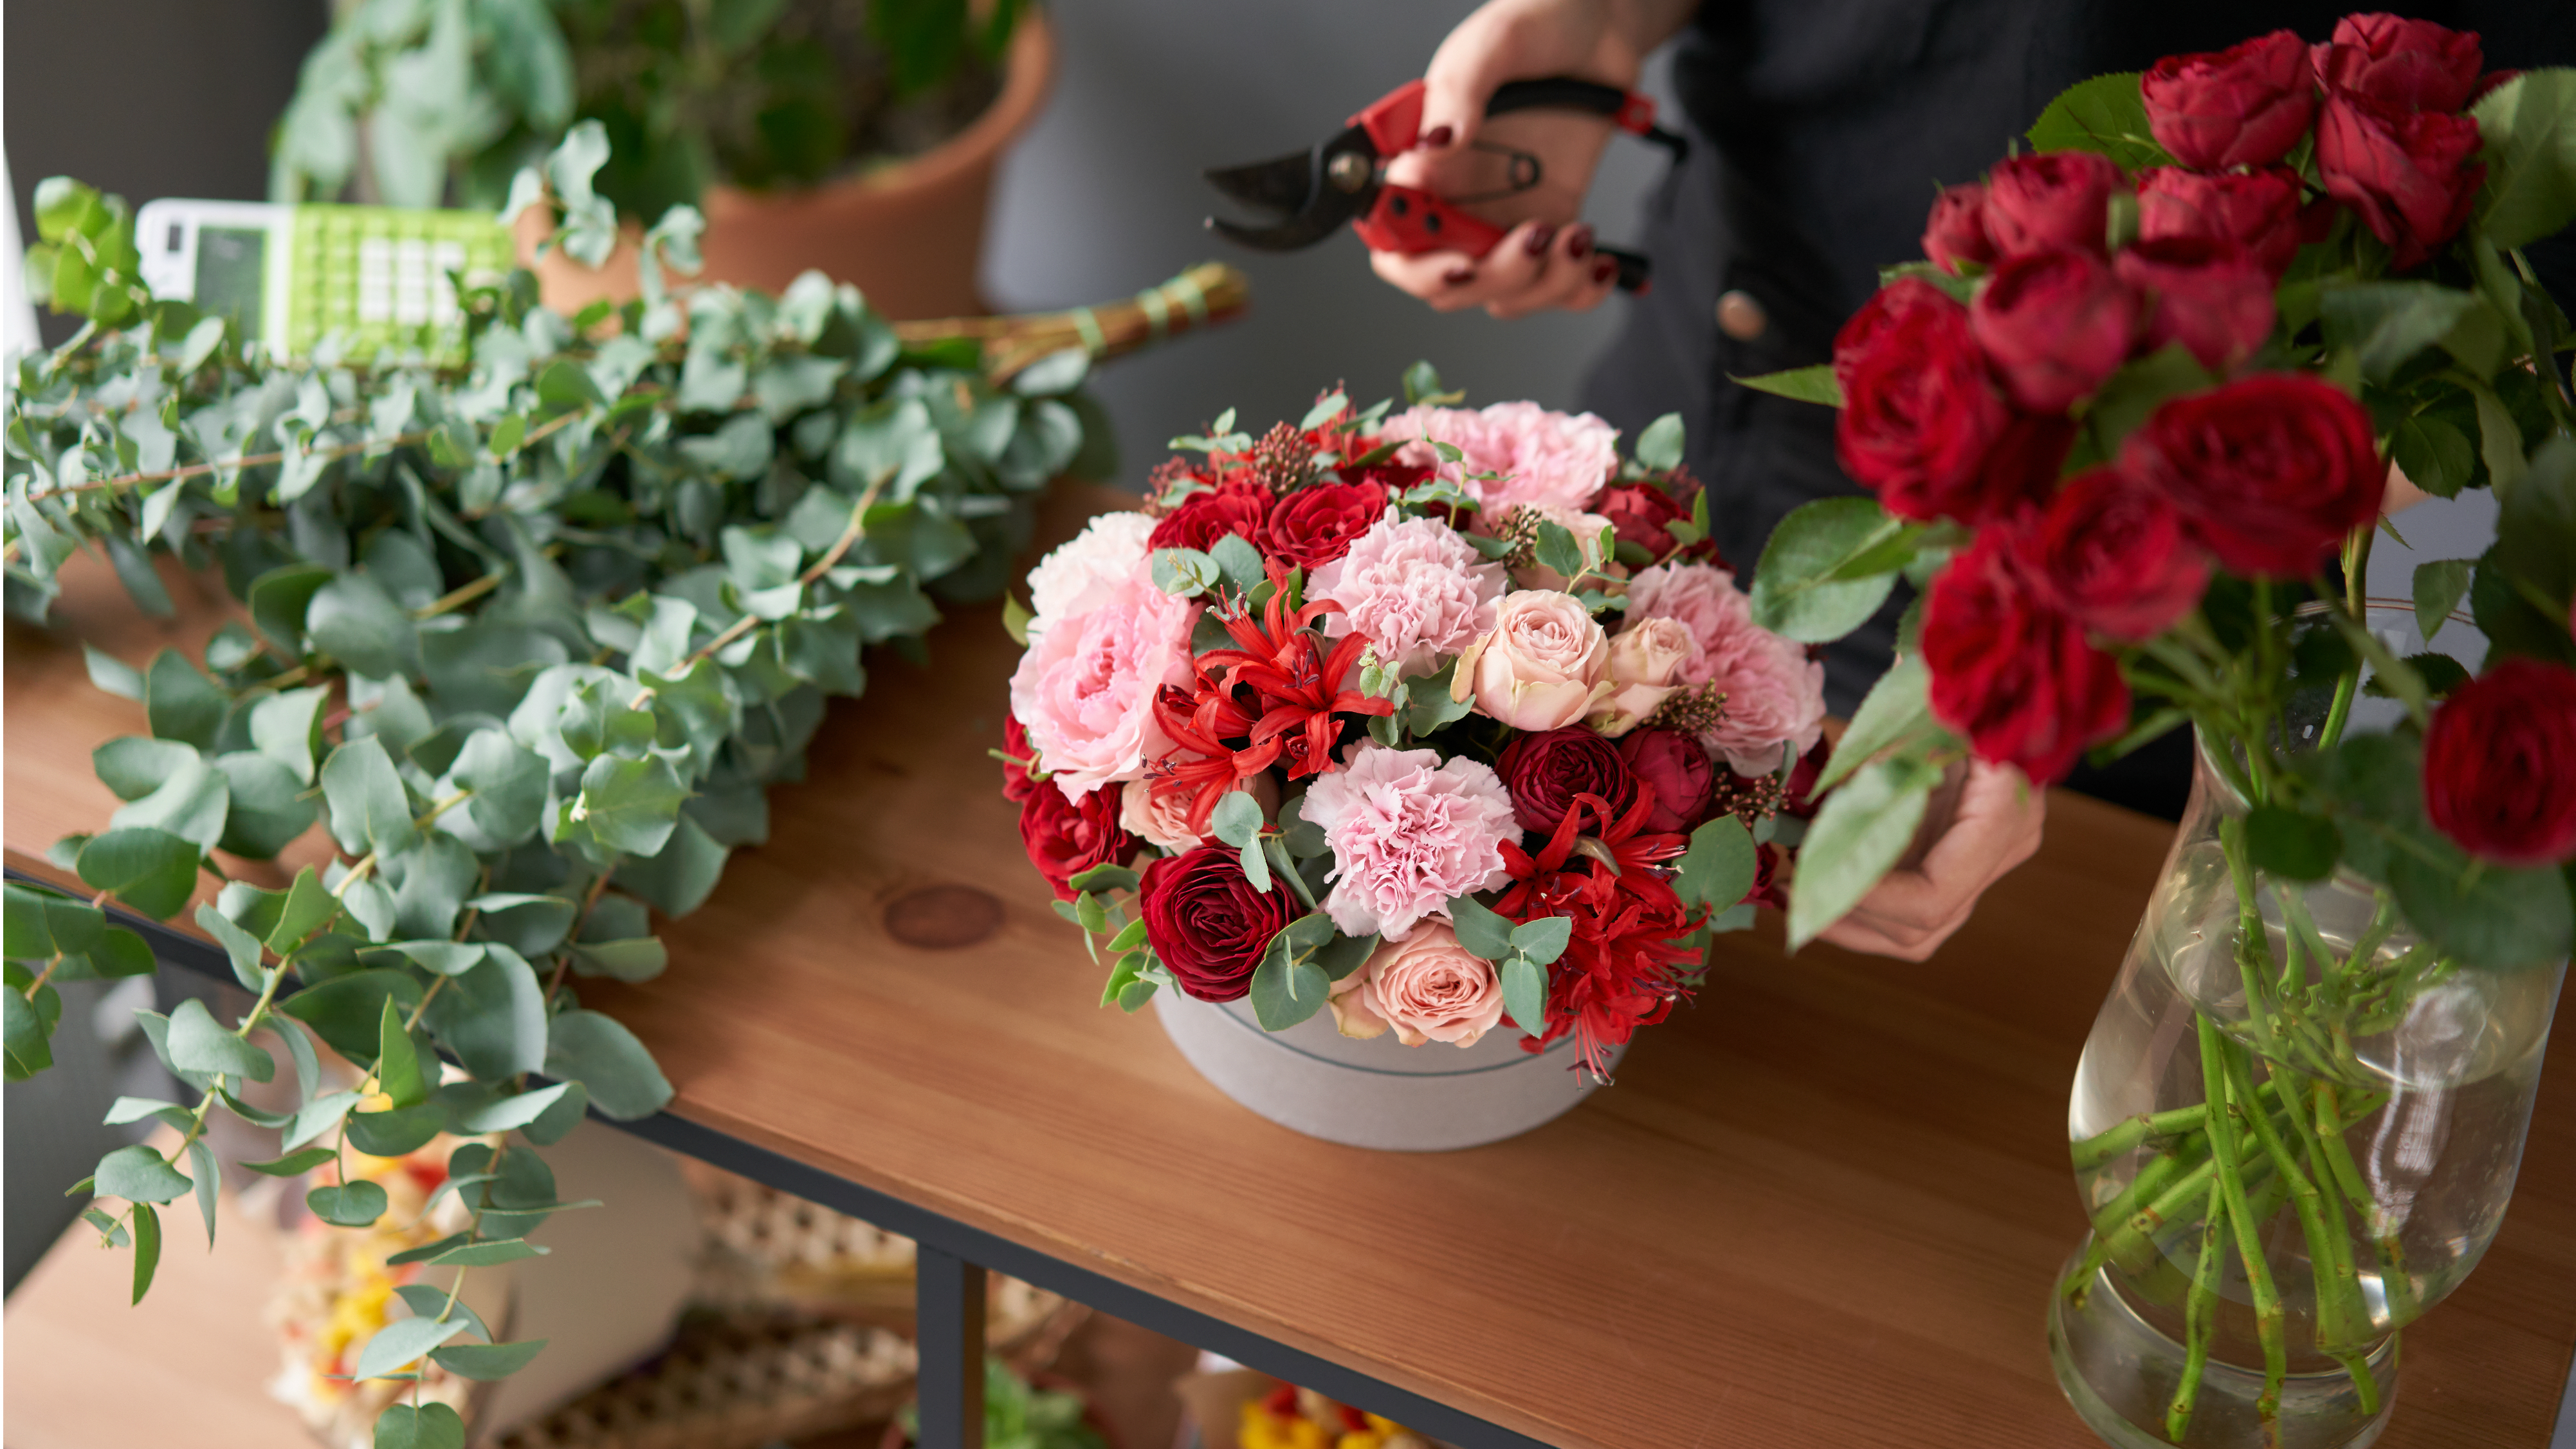 Choosing a Gifting Flower Delivery Service